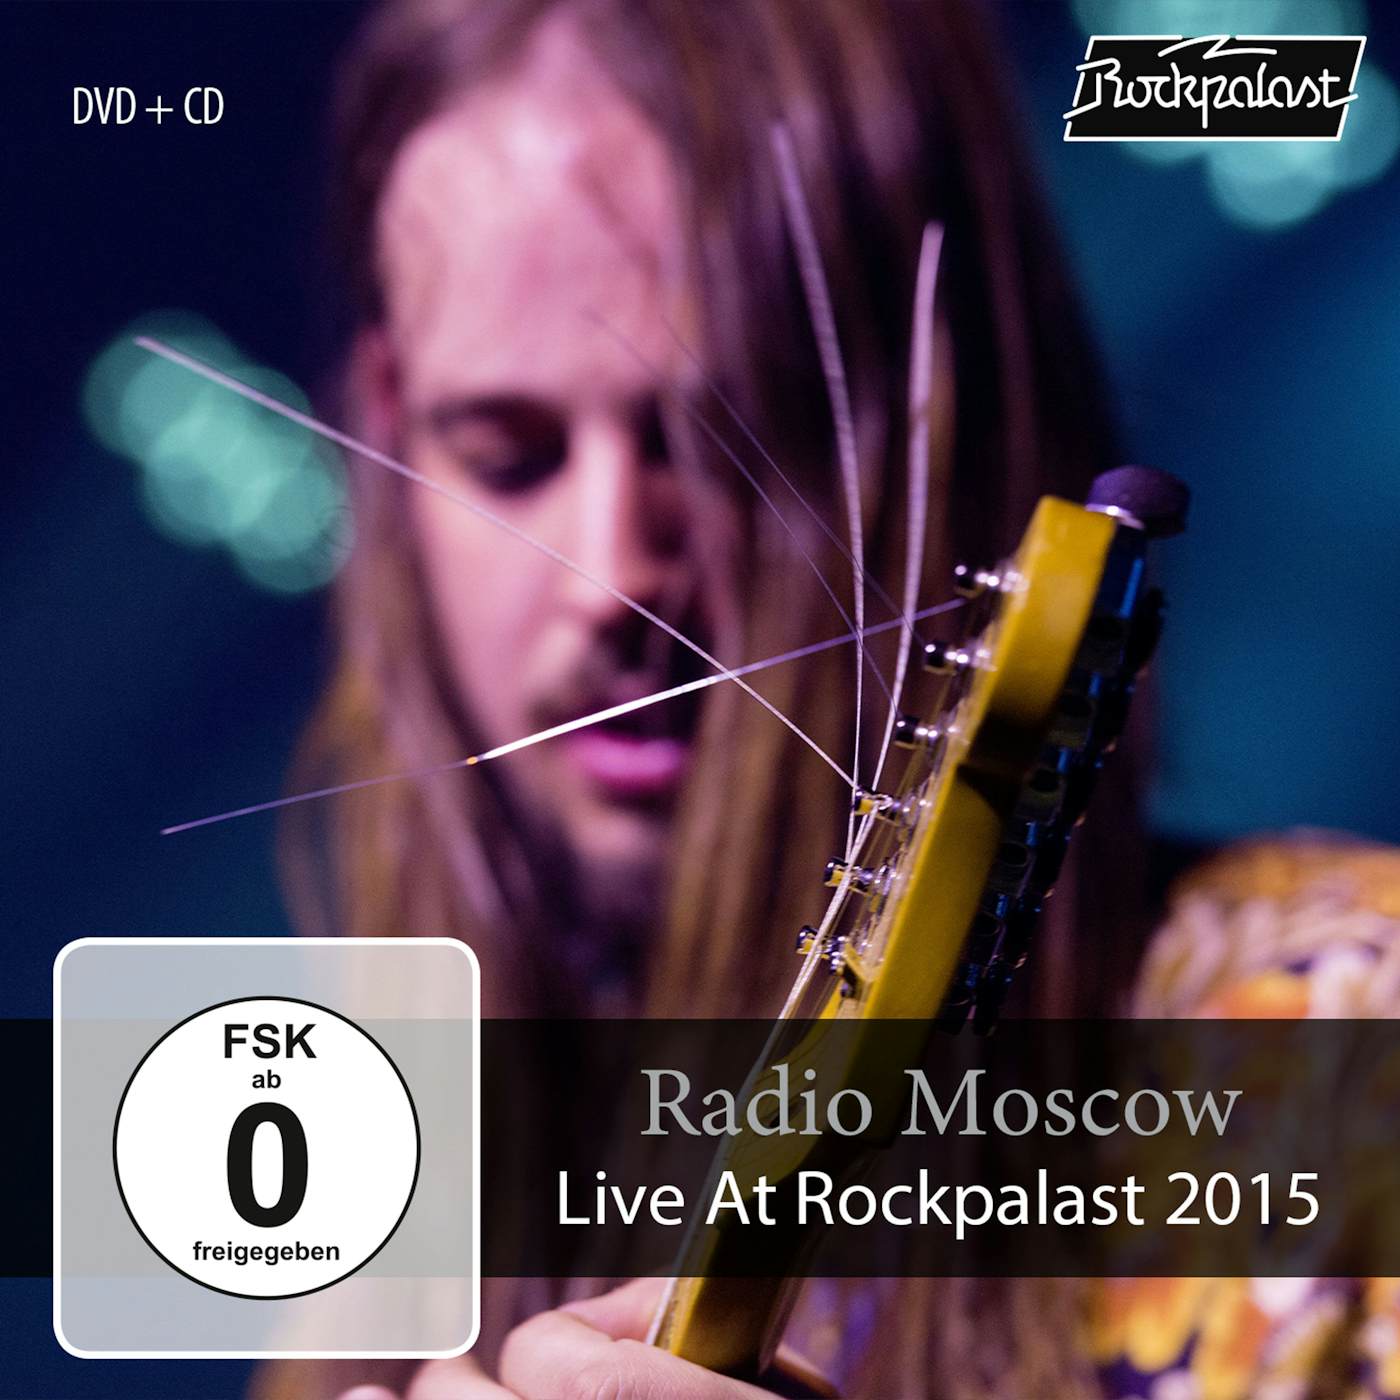 Radio Moscow LIVE AT ROCKPALAST 2015 (CD/DVD) CD